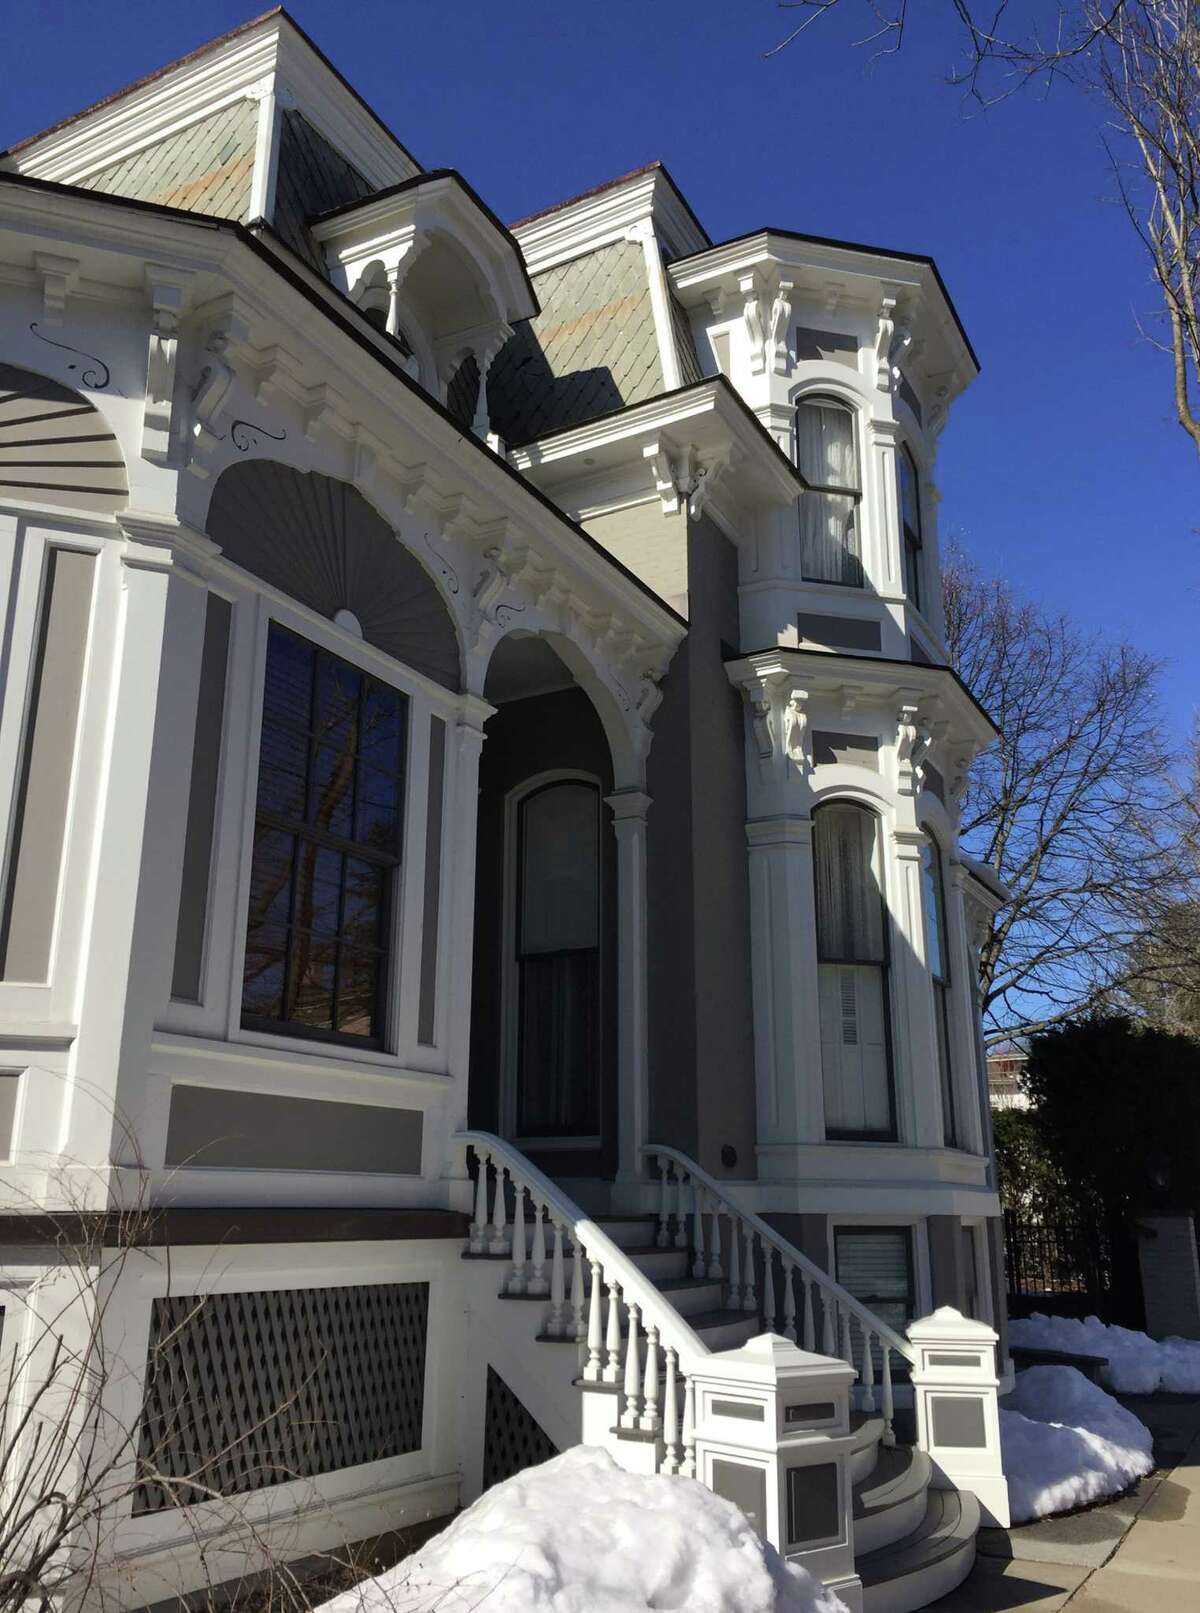 150 Phila St., Saratoga Springs, will be the site of a porch party Thursday, May 10, to benefit the Saratoga Springs Preservation Foundation. It's also a stop along a self-guided tour of historic homes May 12. (Photo provided)